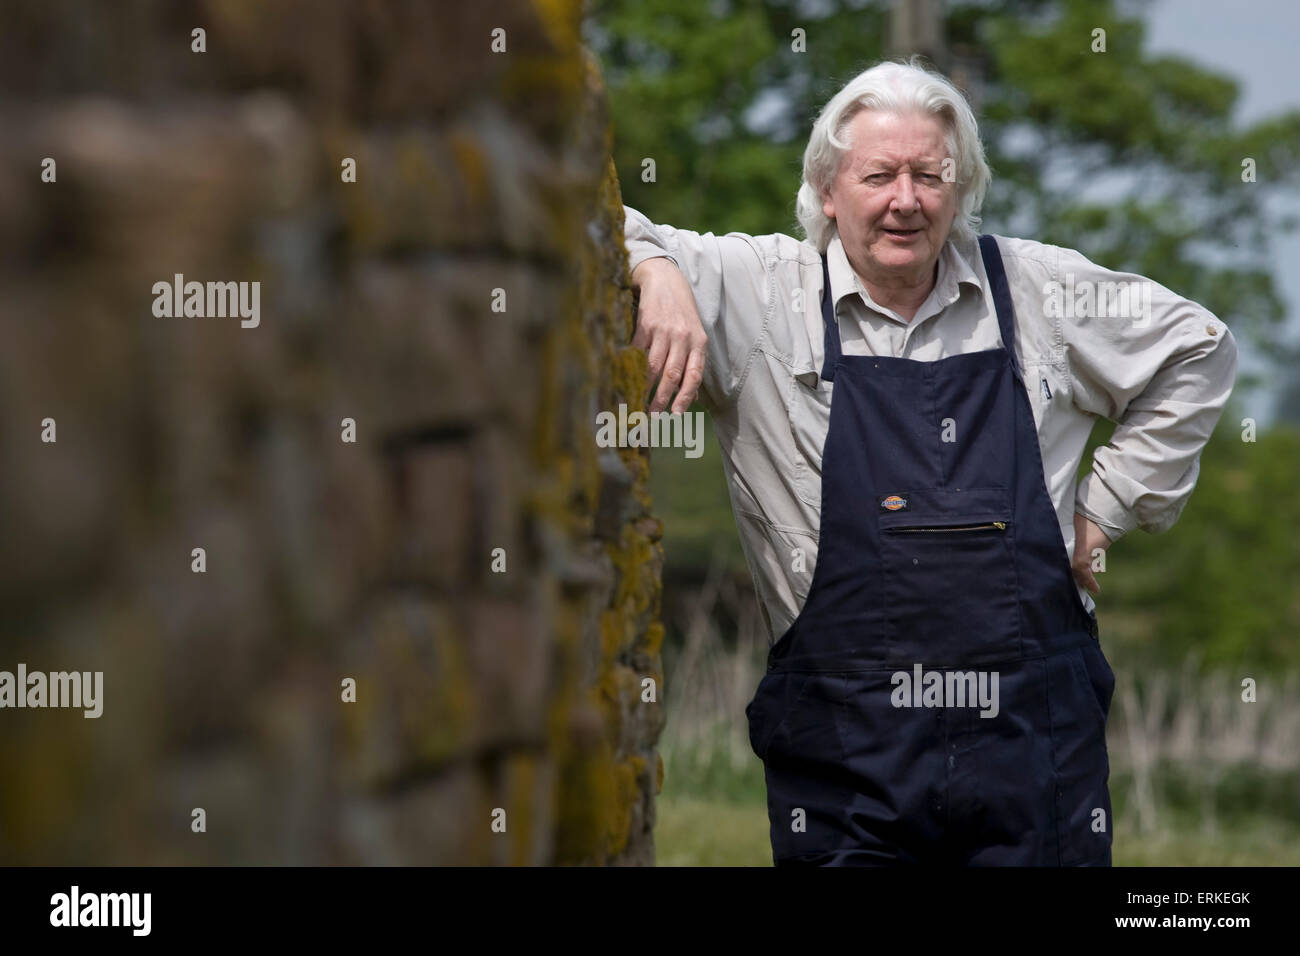 Investigative journalist Andrew Jennings, pictured at his home on a farm in Inglewood, near Penrith in Cumbria. Jennings has conducted many investigations into corruption at the International Olympic Committee and football's world governing body FIFA. He was instrumental in bringing about the 2015 FBI investigation into corruption at FIFA which led to the resignation of president Sepp Blatter. Stock Photo